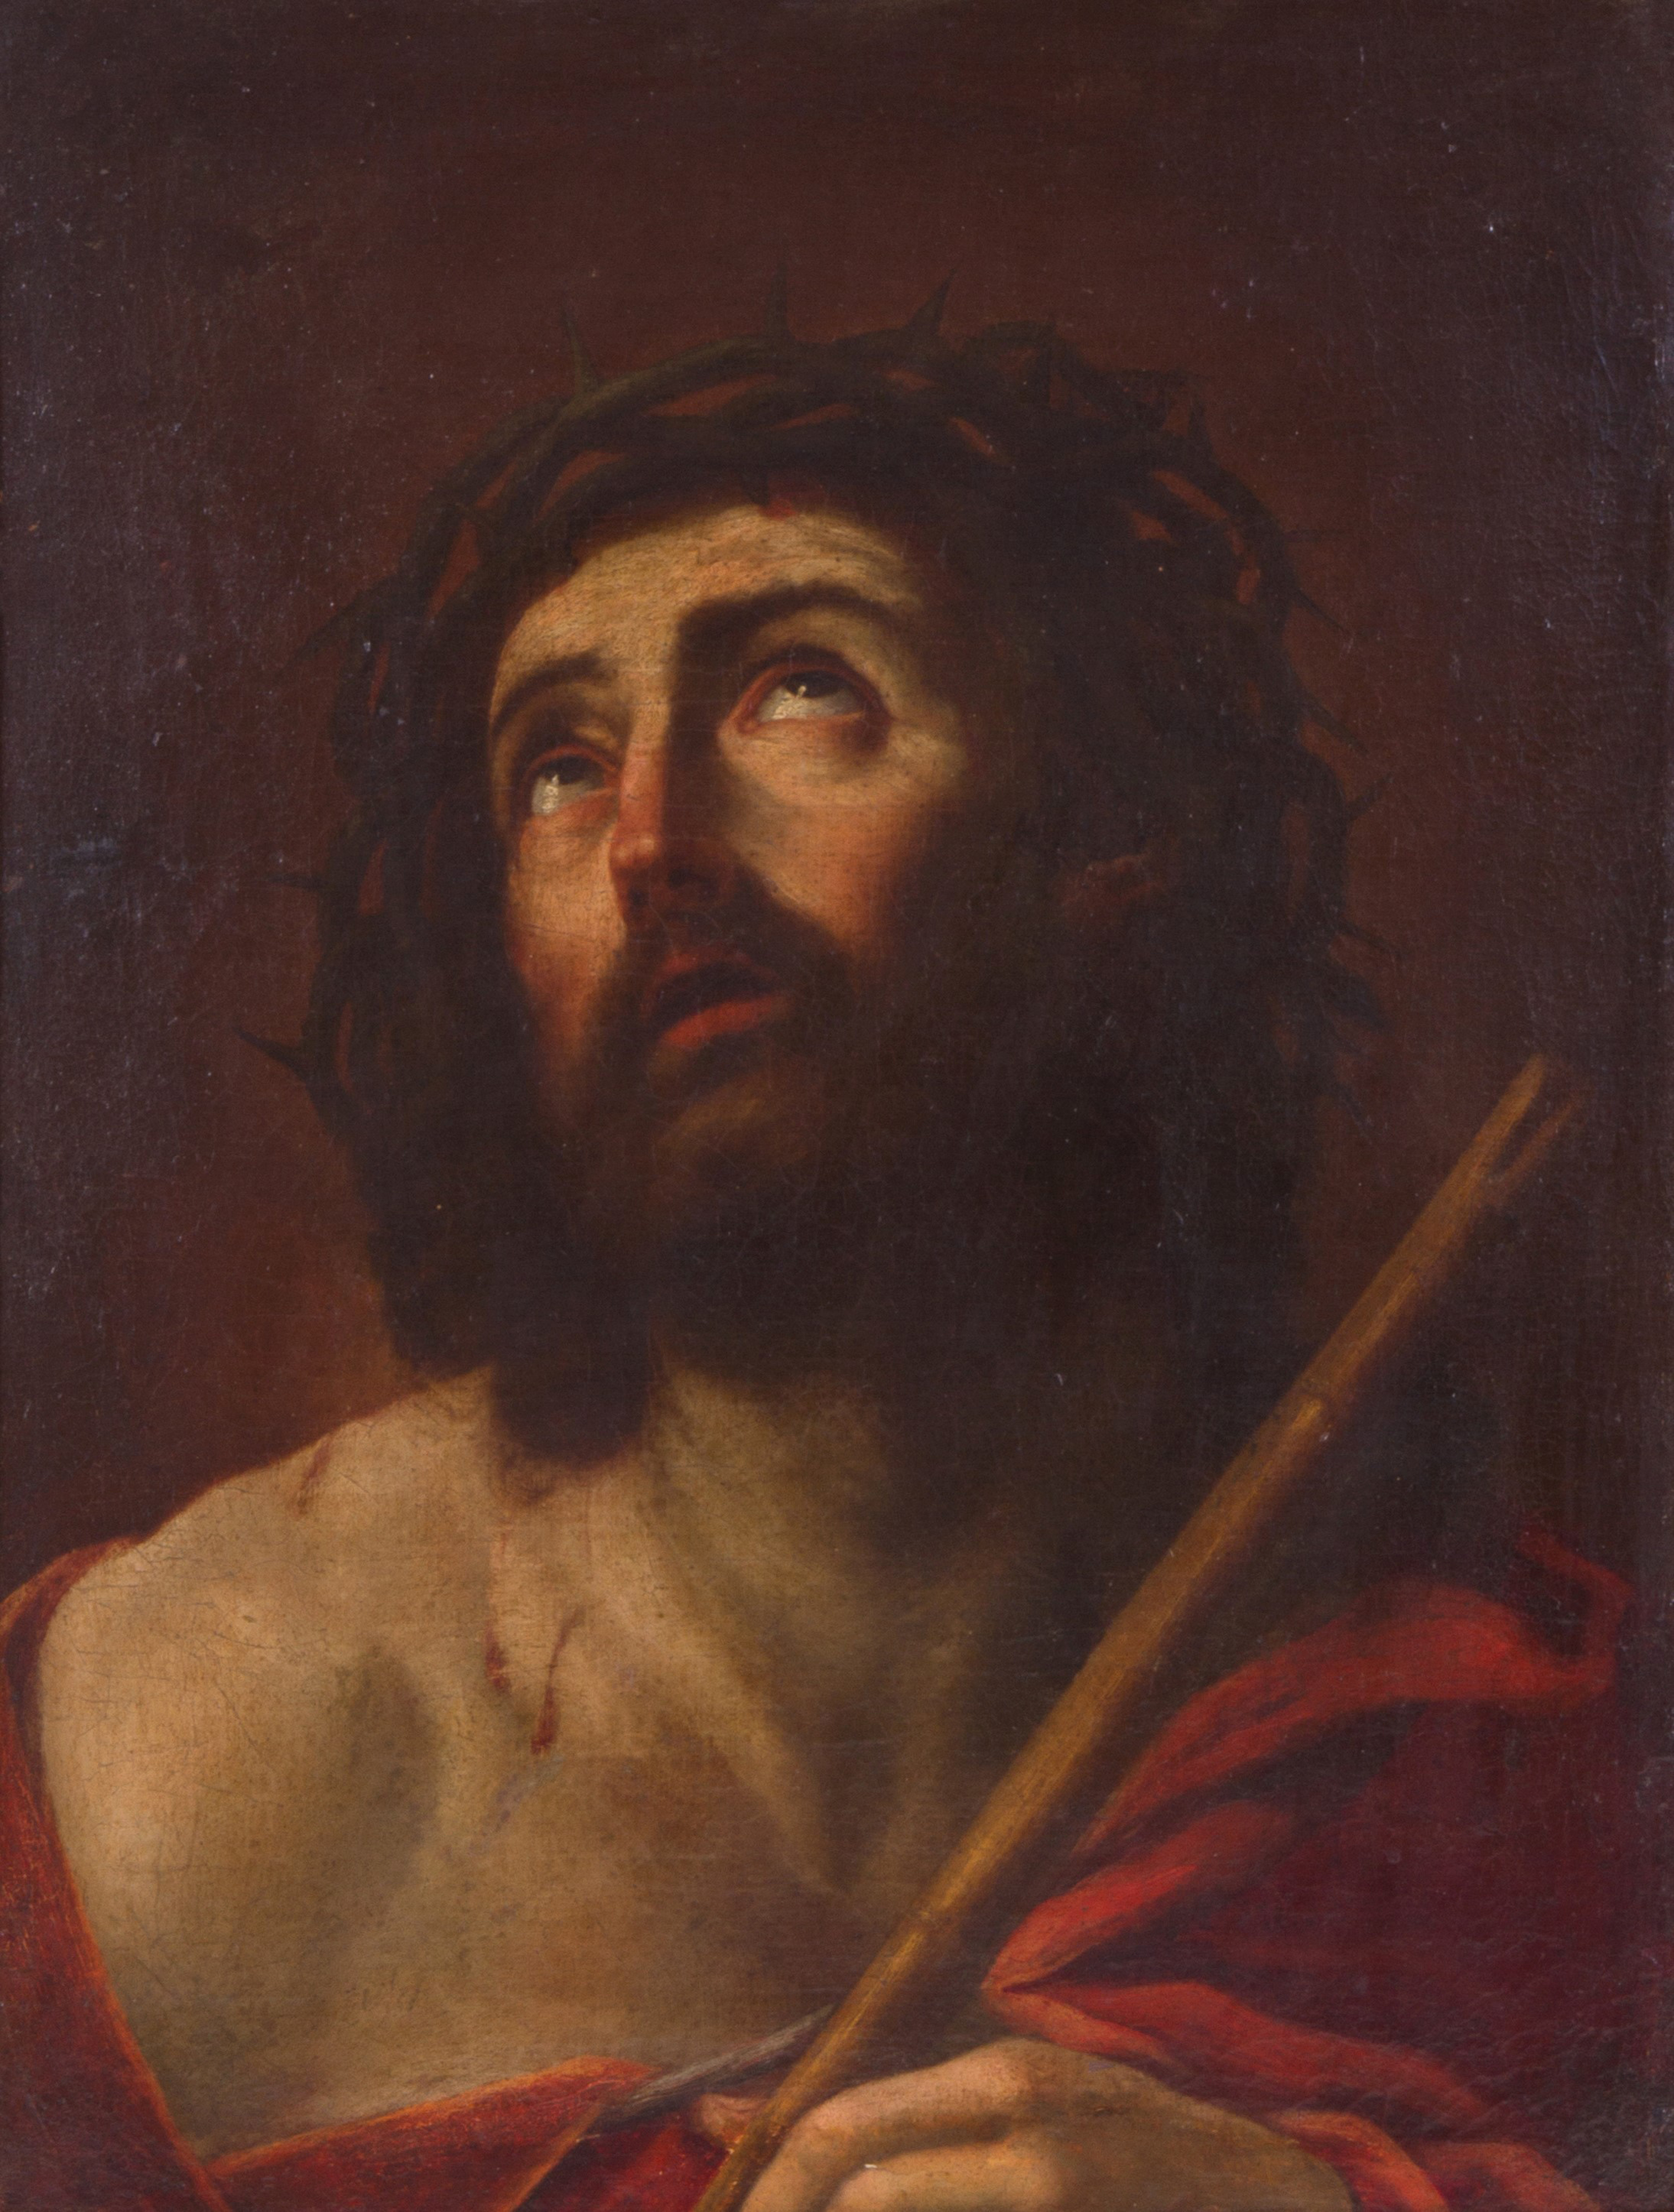 GUIDO RENI (copy by). Painting "ECCE HOMO" - Image 2 of 3